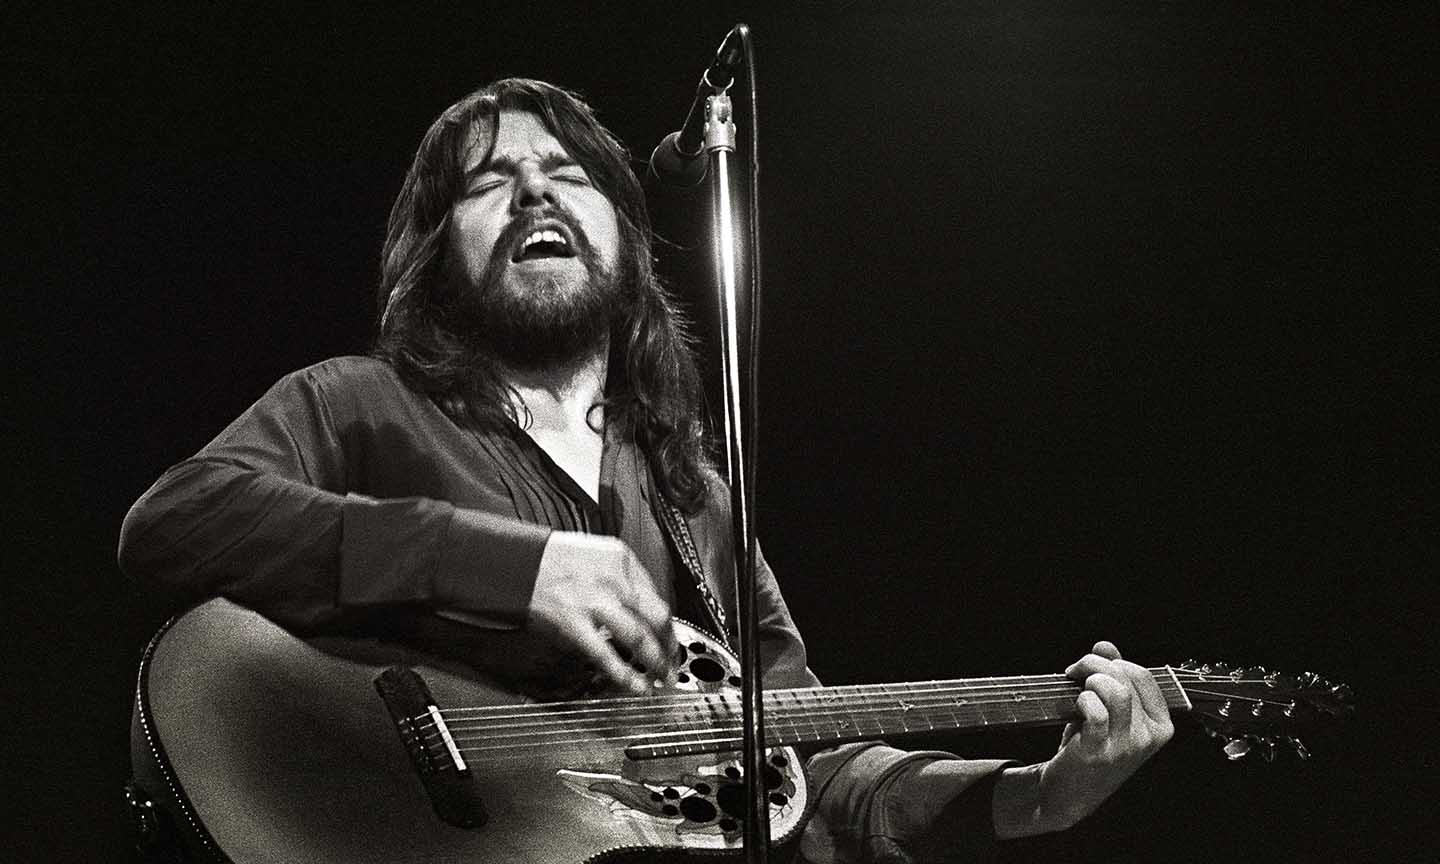 Old Time Rock & Roll': The Story Behind Bob Seger's Classic Rock Hit